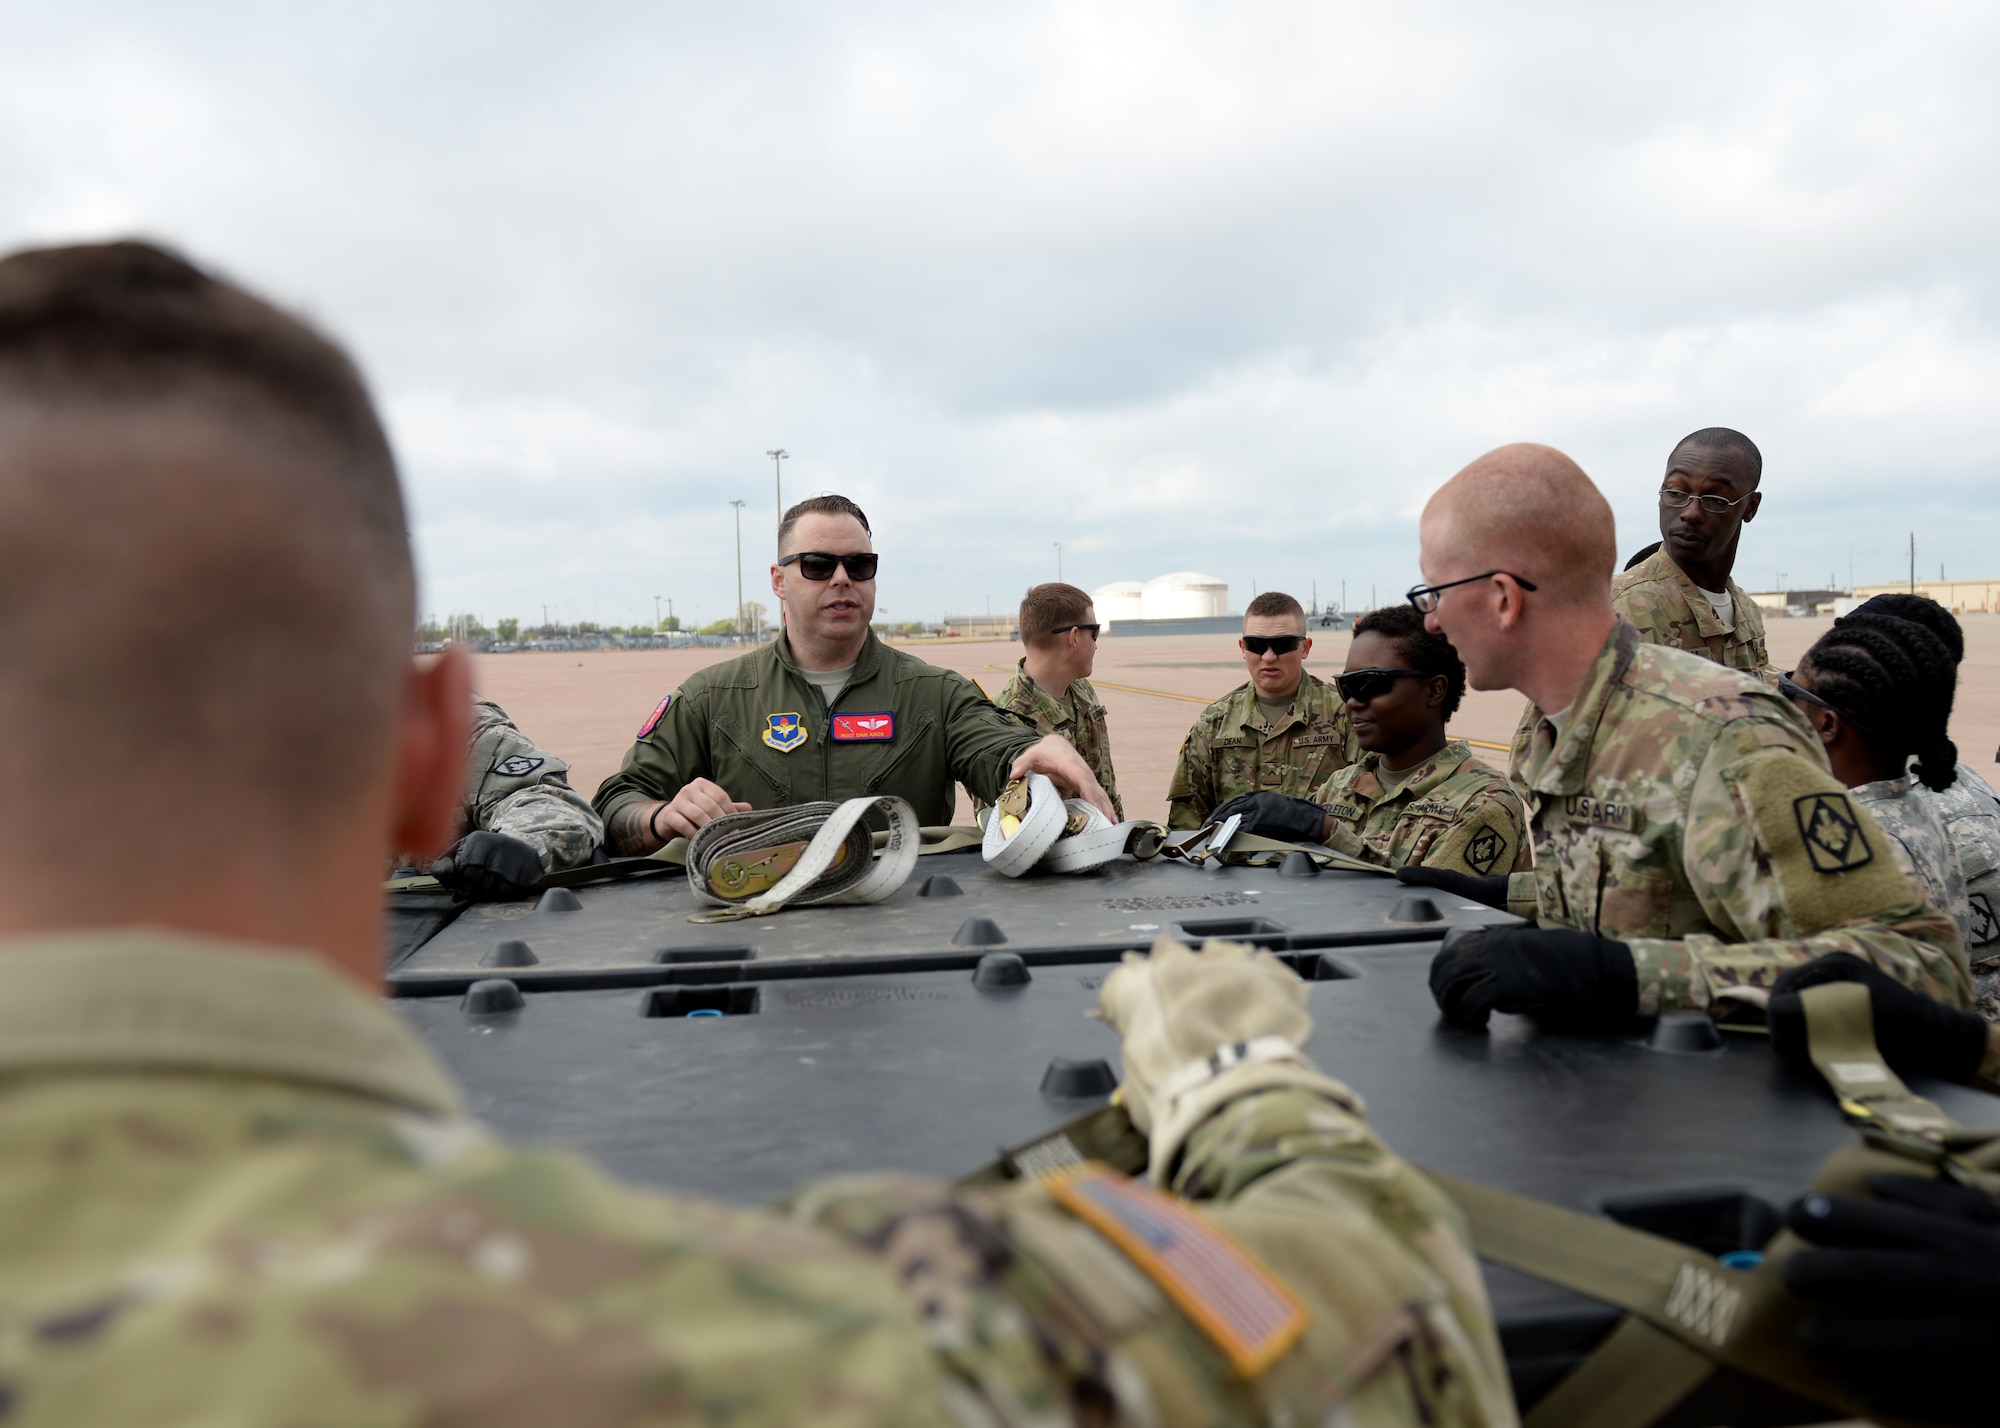 U.S. Air Force Master Sgt. Edwin Amos, 58th Airlift Squadron instructor loadmaster, educates U.S. Army Soldiers assigned to the 578th Forward Support Company at Fort Sill, Oklahoma, about the weight restrictions of the straps, March 23, 2017, at Altus Air Force Base, Oklahoma. The soldiers came to Altus AFB to learn how to secure cargo pallets and vehicles to a U.S. Air Force C-17 Globemaster III cargo aircrafts. (U.S. Air Force photo by Airman 1st Class Jackson N. Haddon/Released).